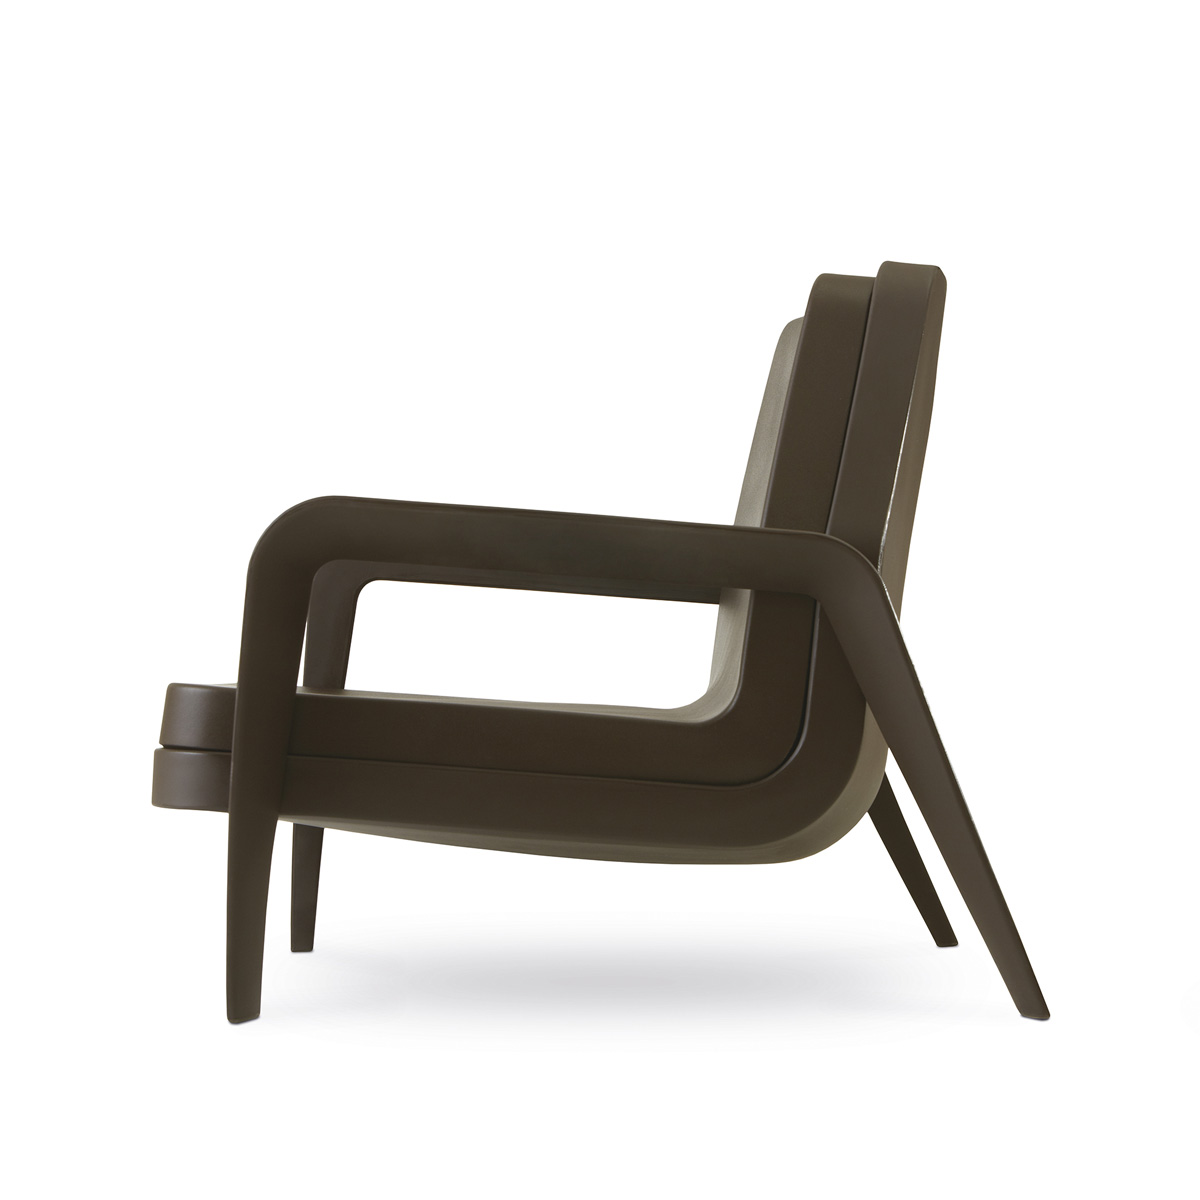 America lounge chair from Slide